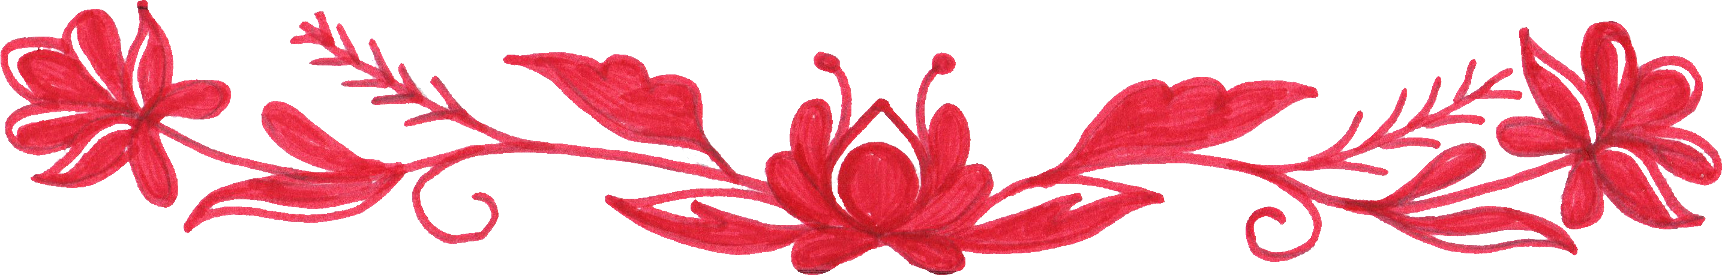 Free Download - Red Flower Border Png (1722x275)